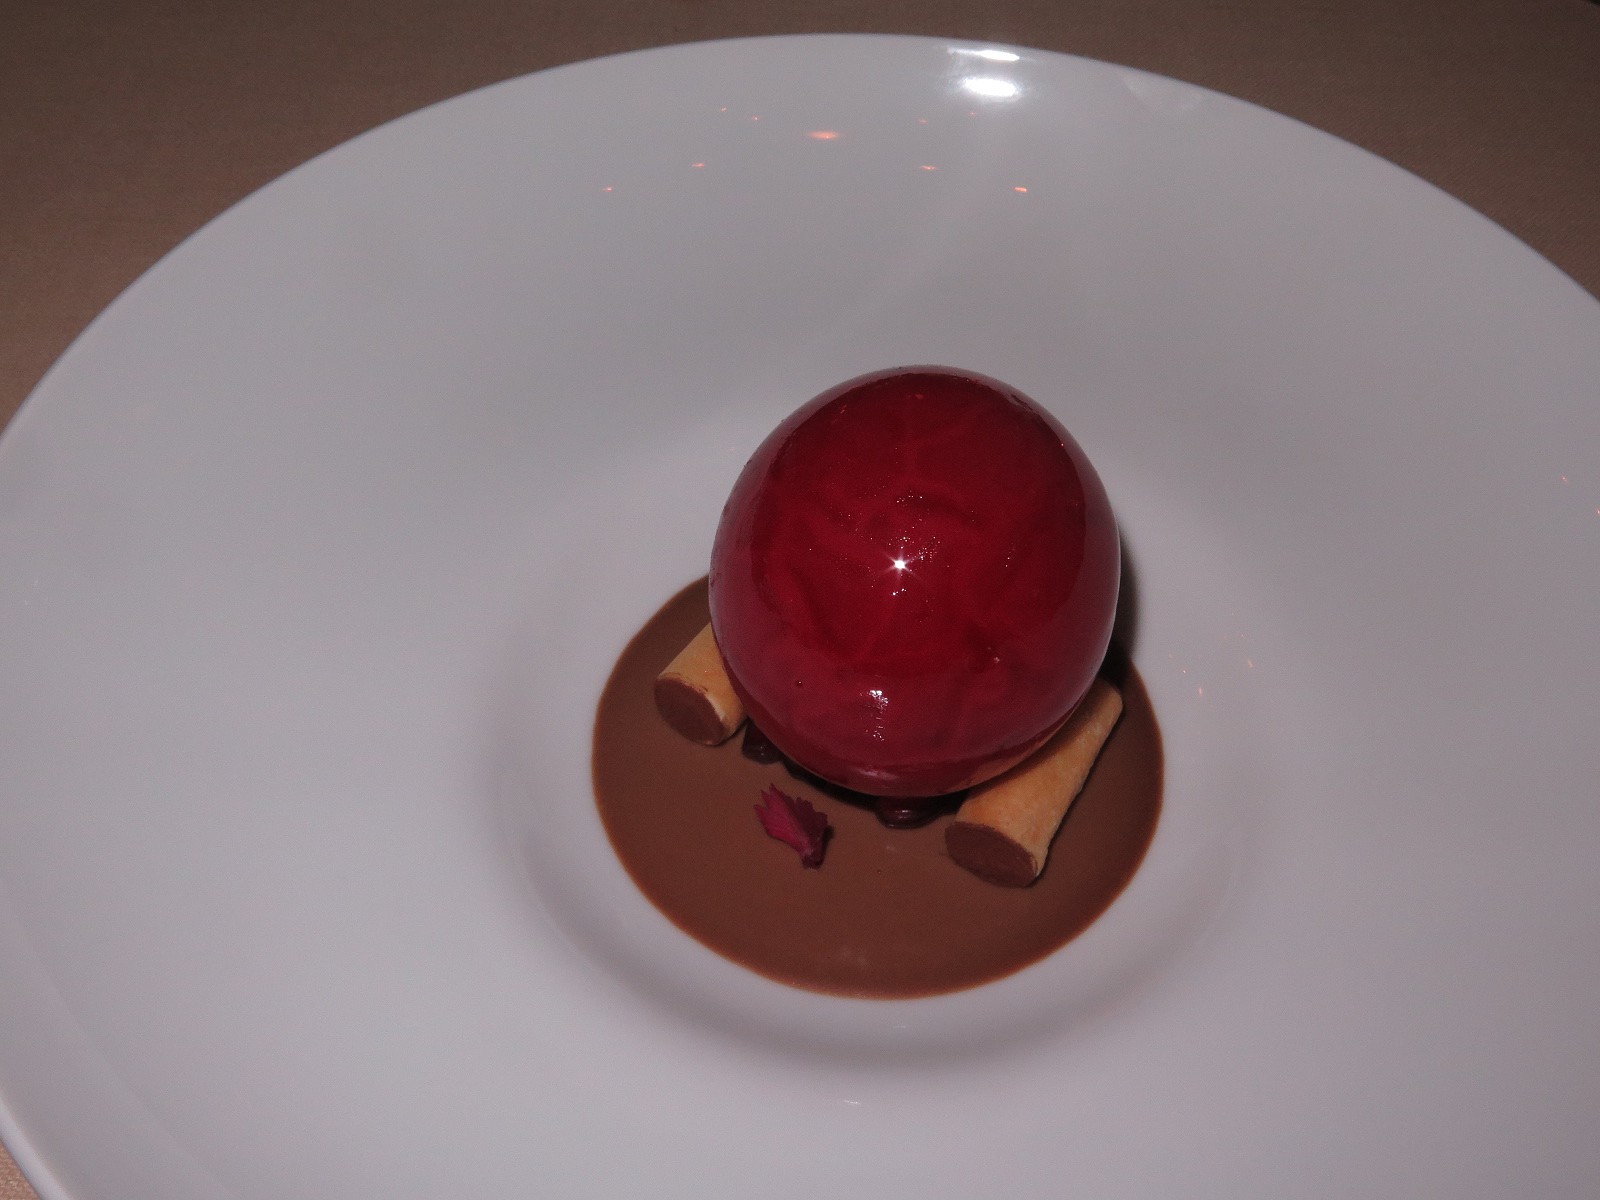 Iced sphere of pomegranate on gianduia cream and cannelloni filled with salty pine-seed chantilly 